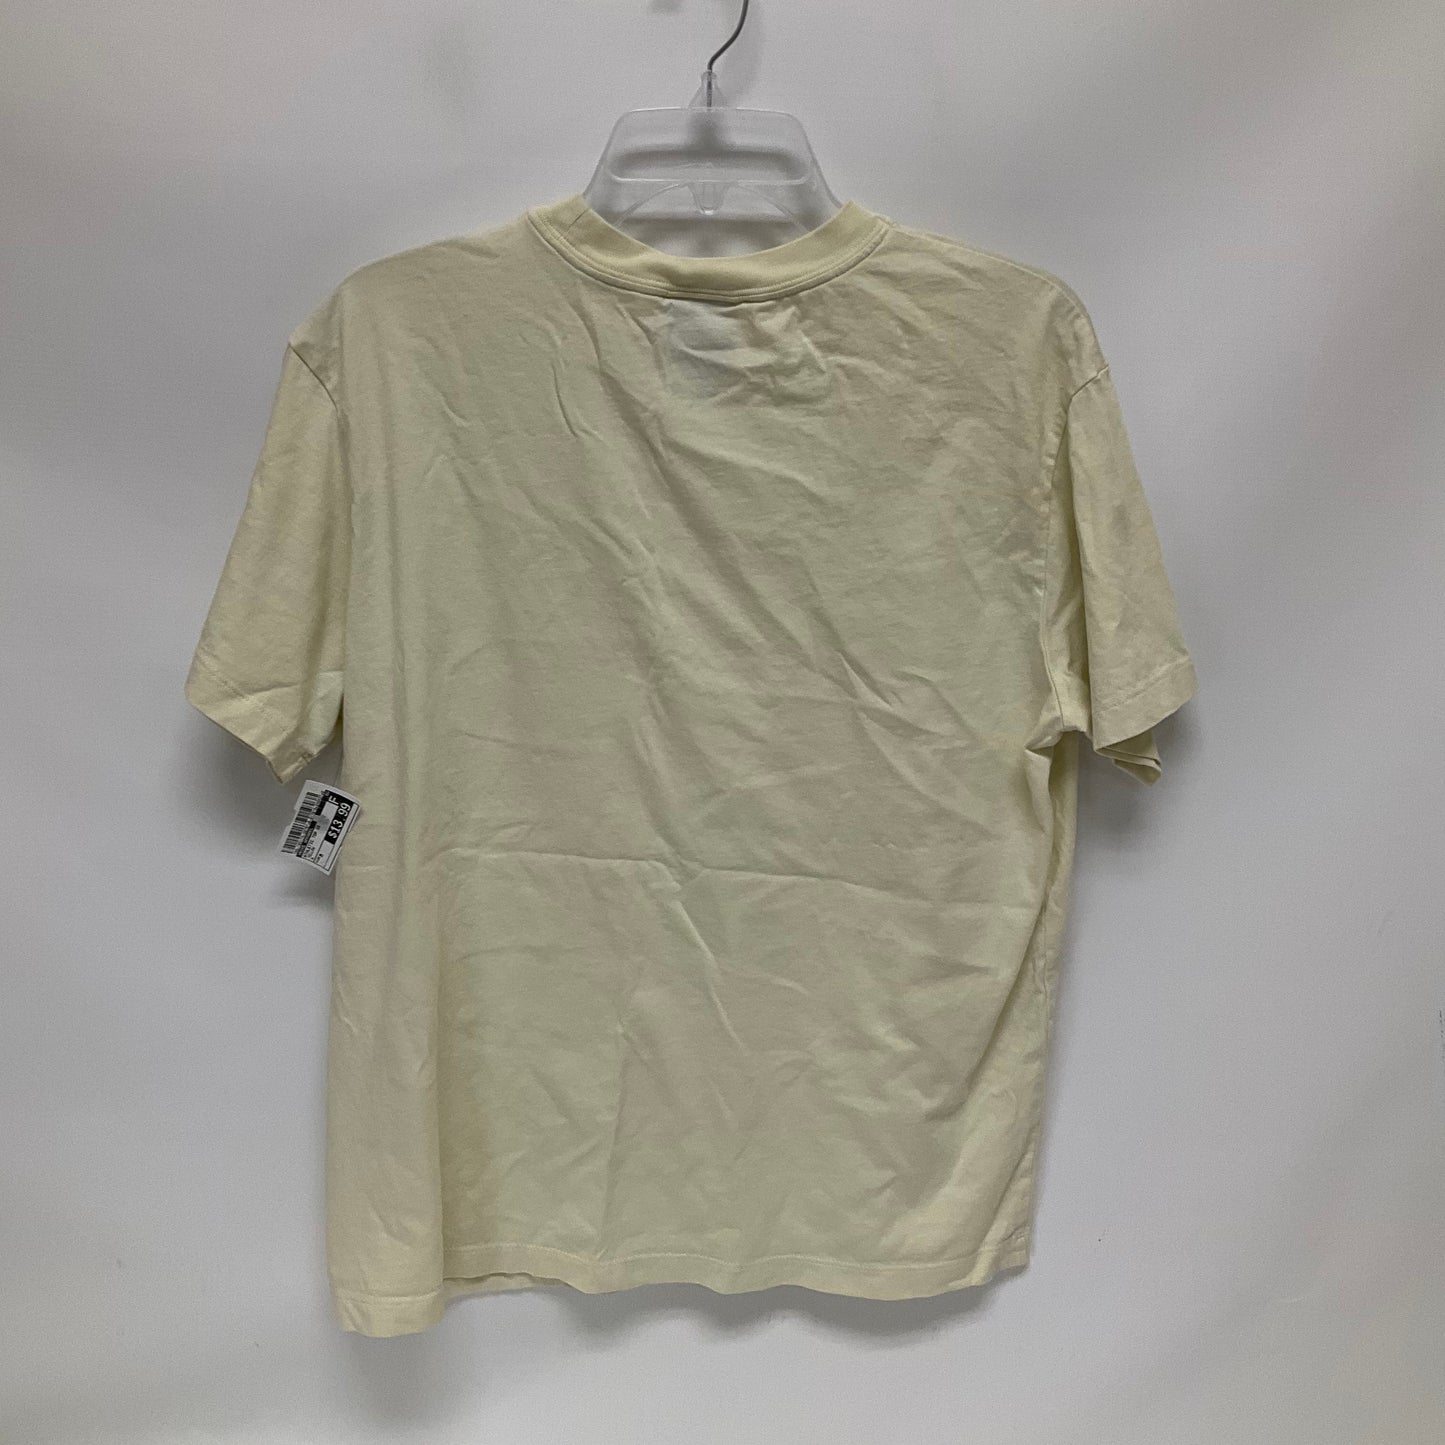 Yellow Athletic Top Short Sleeve Nike Apparel, Size M